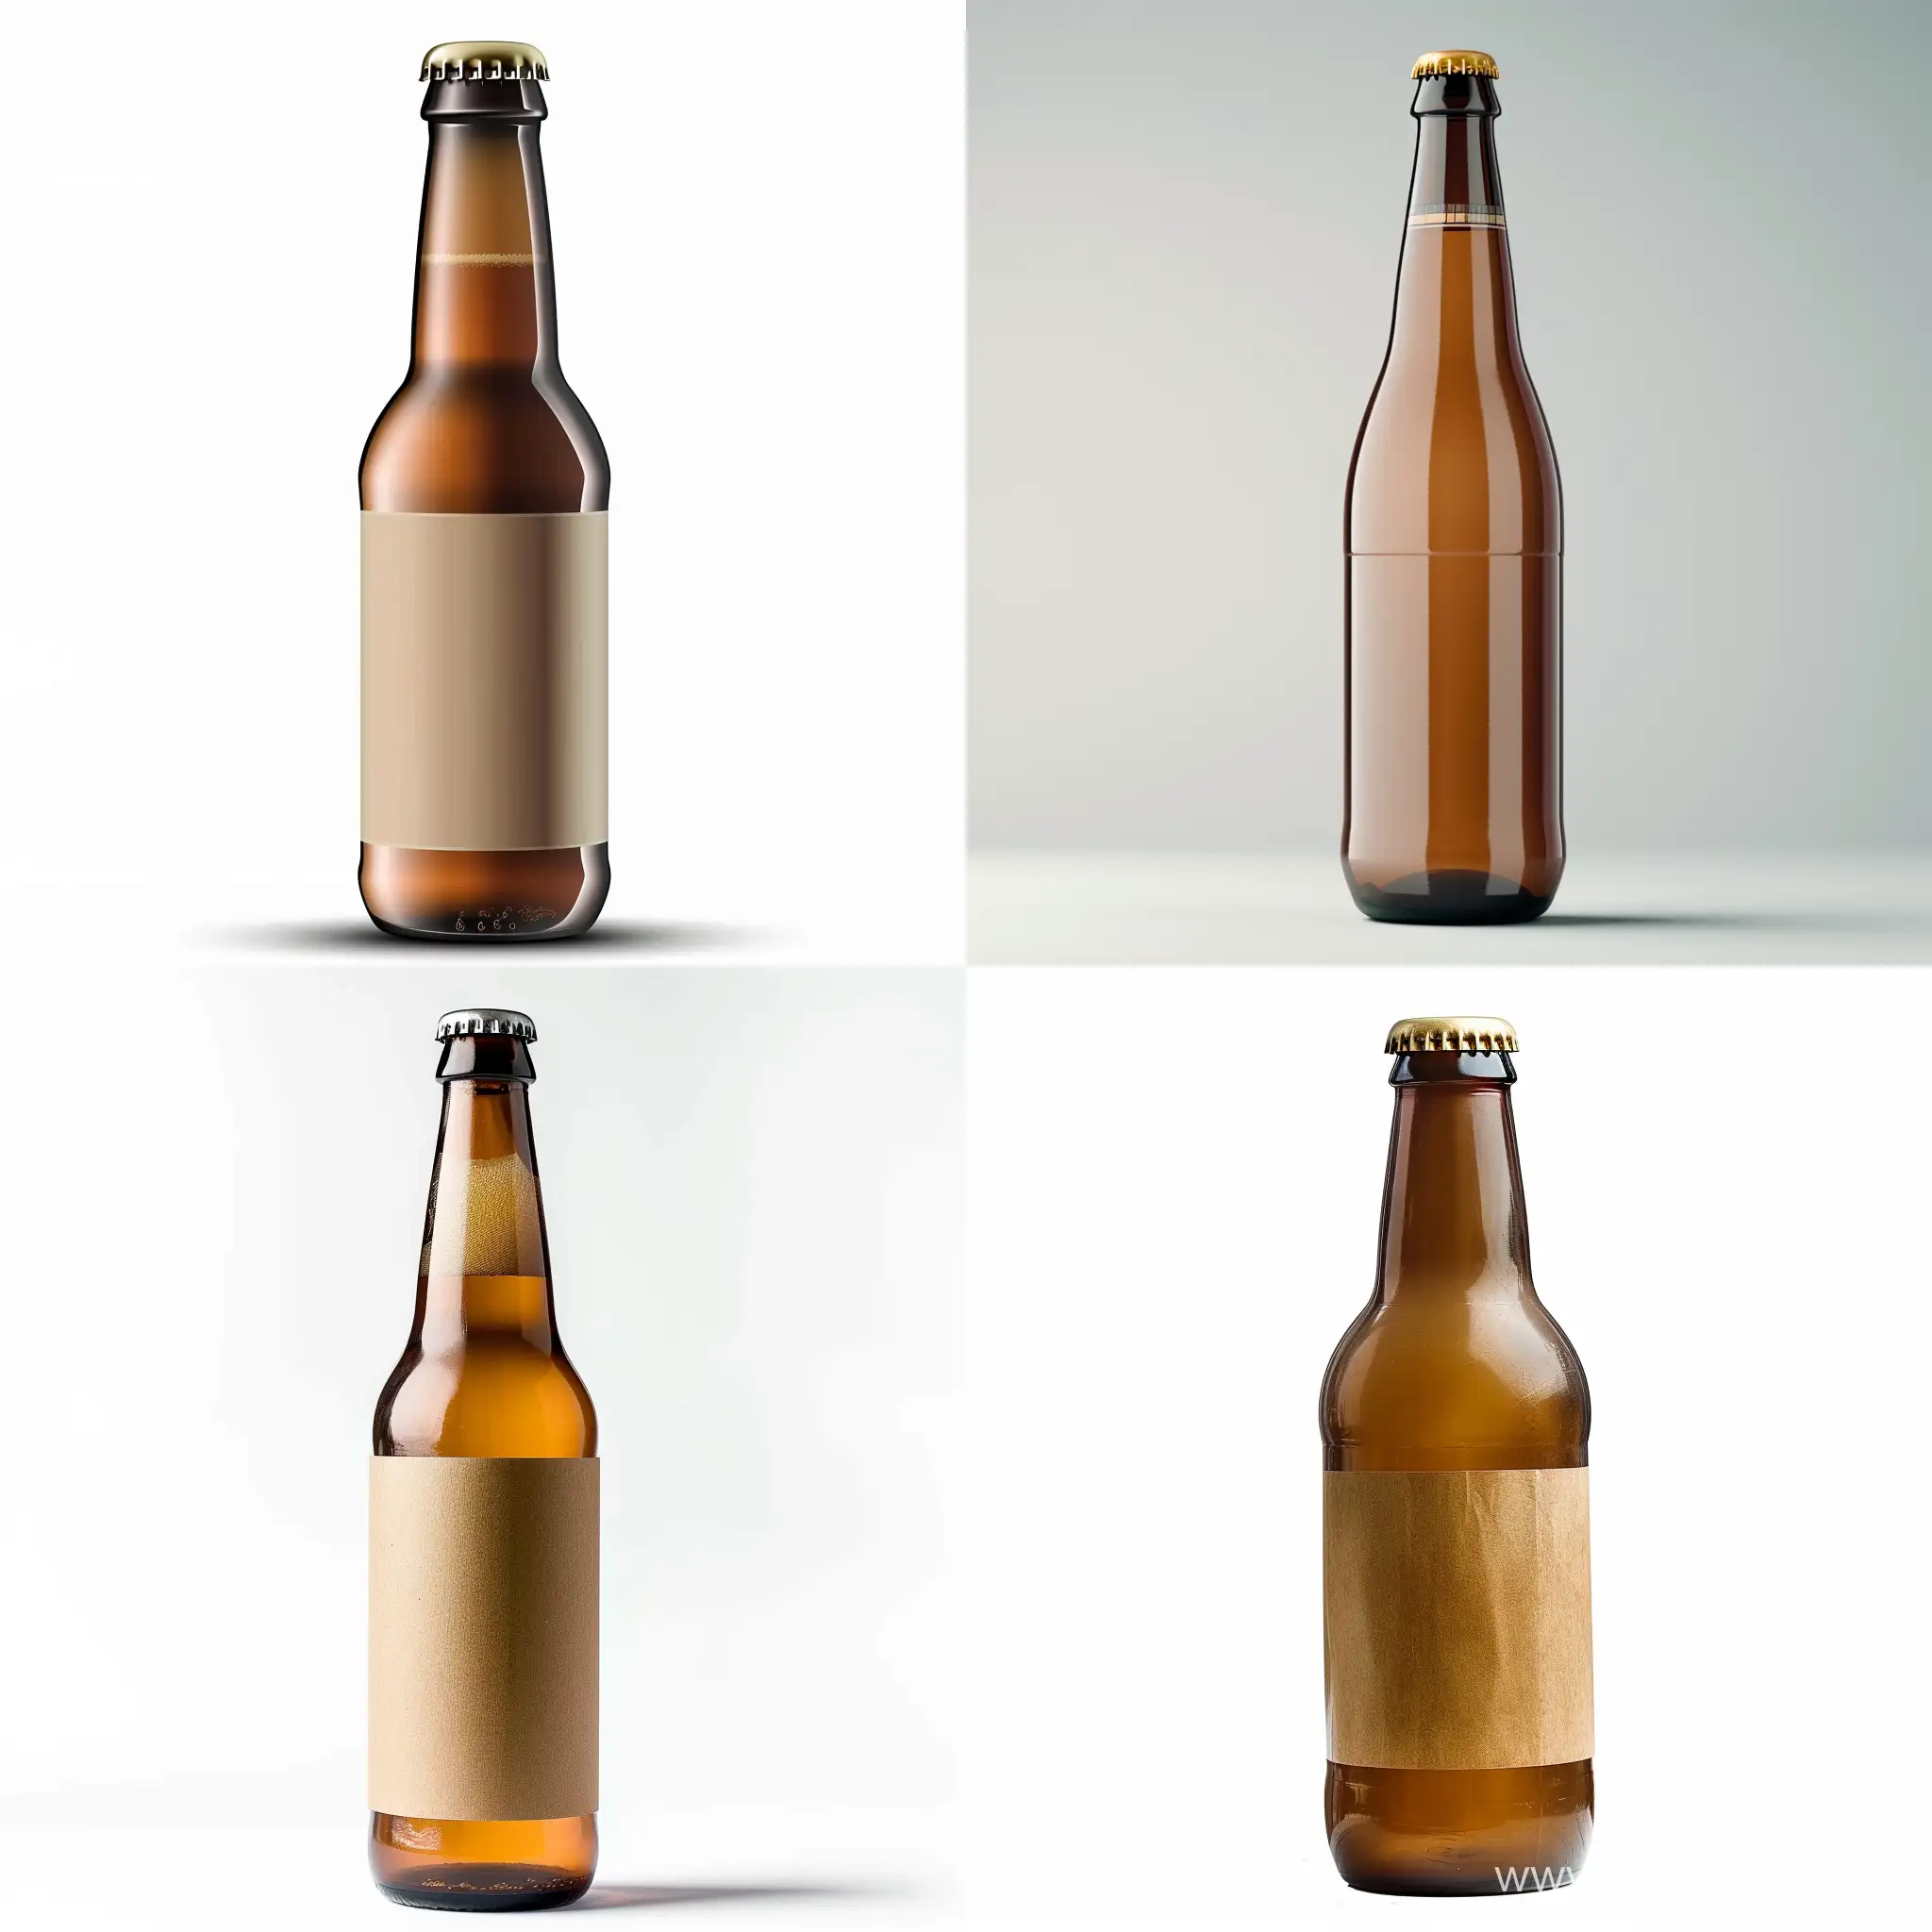 Endless-One-Liter-Brown-Glass-Beer-Bottle-with-Label